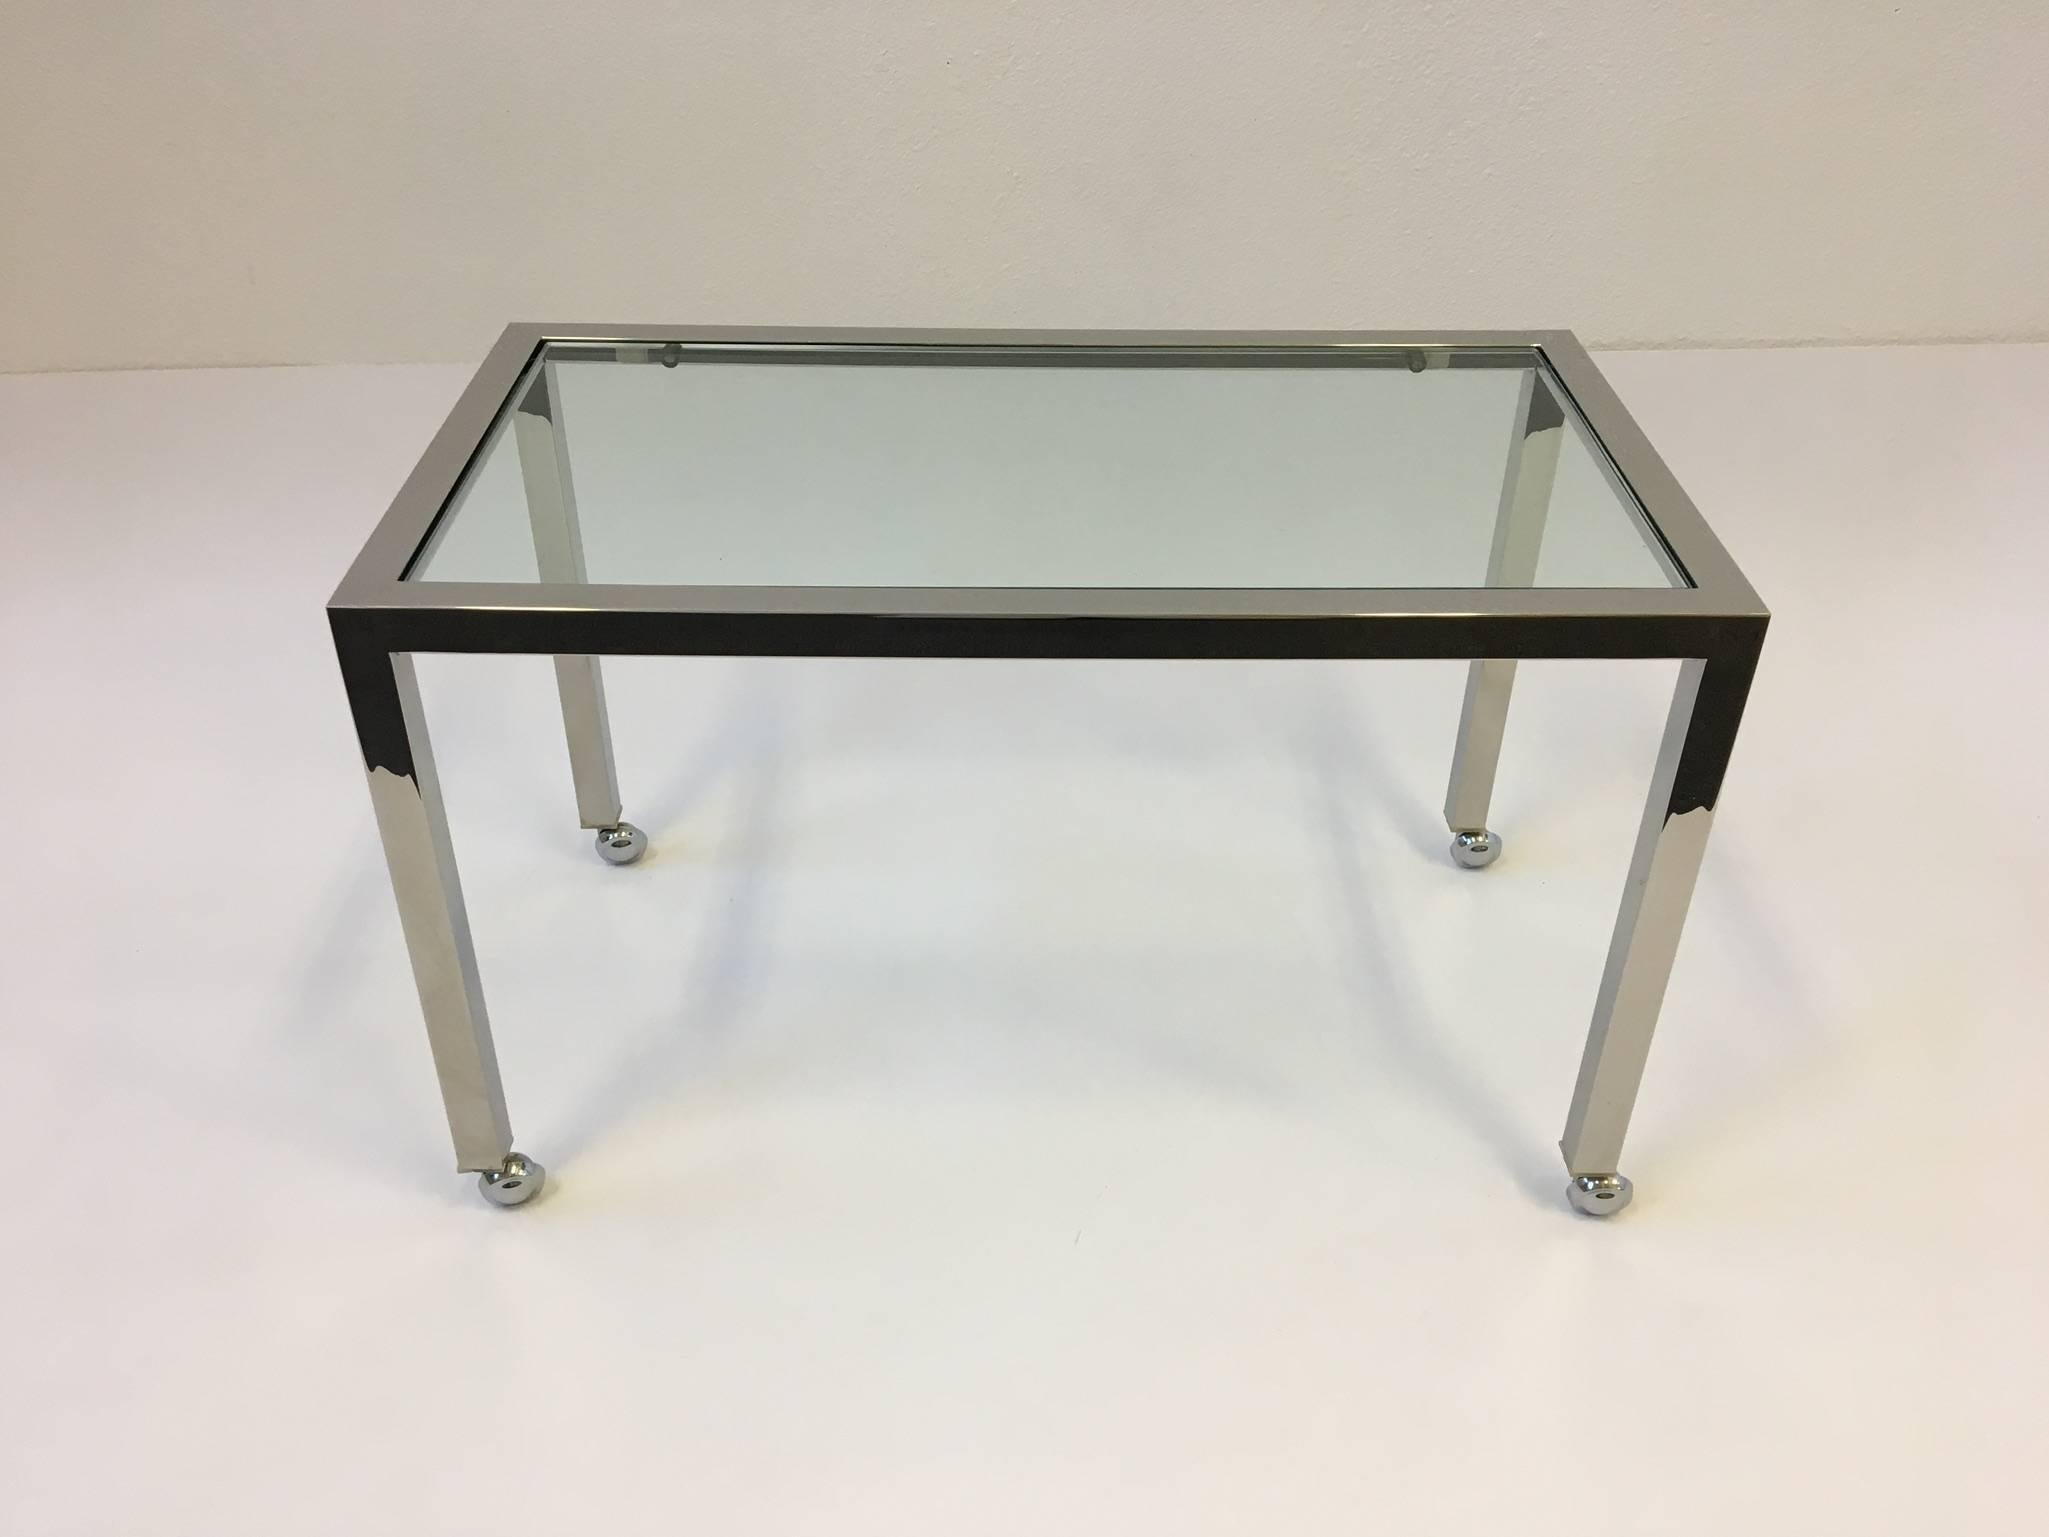 American Chrome and Glass on Casters Side Table, style of Milo Baughman